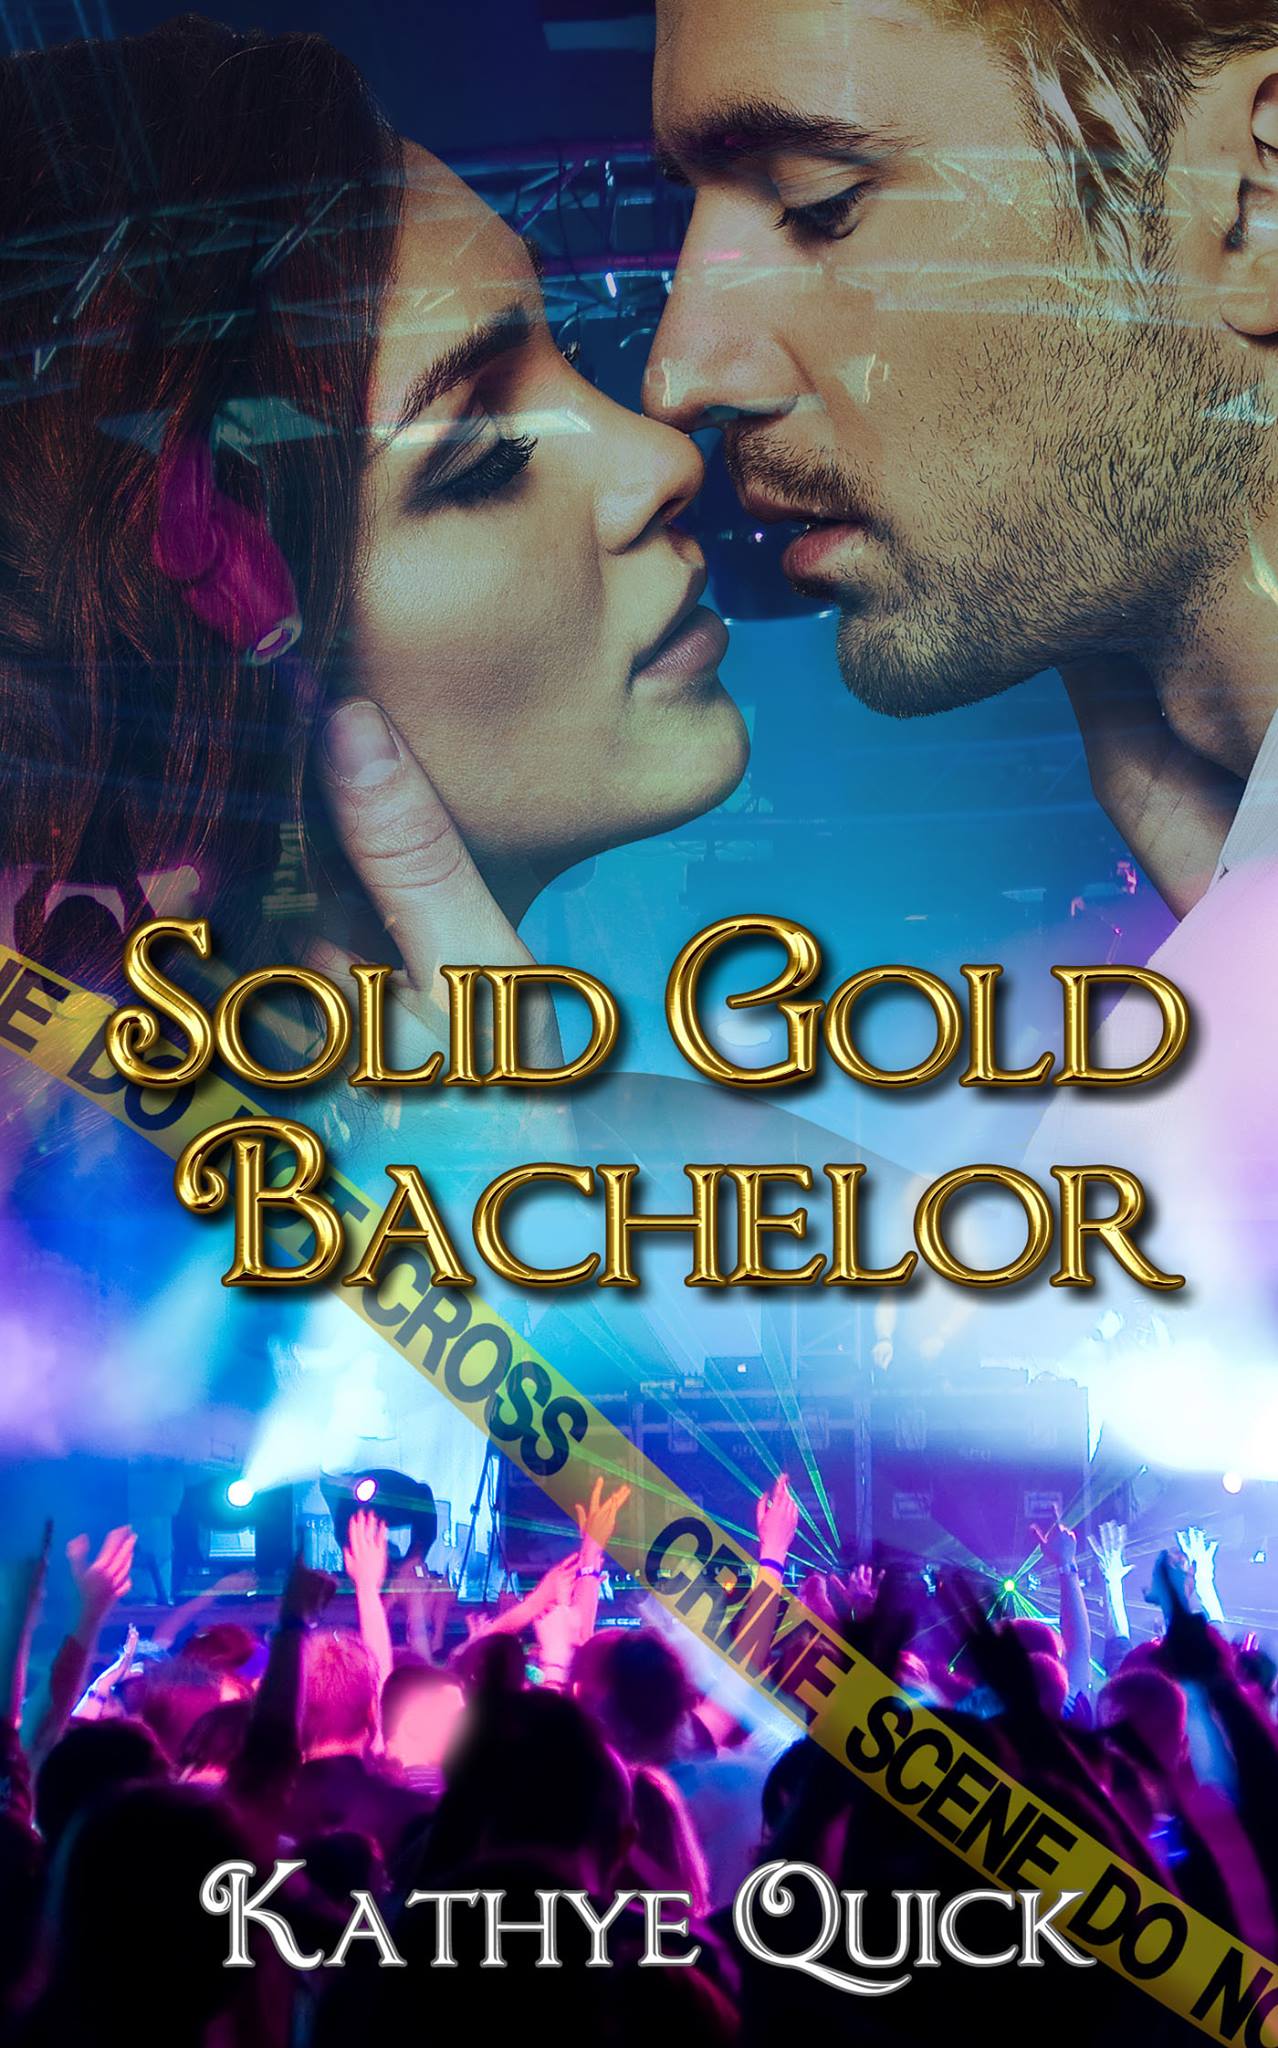 Solid Gold Bachelor -- Kathryn Quick